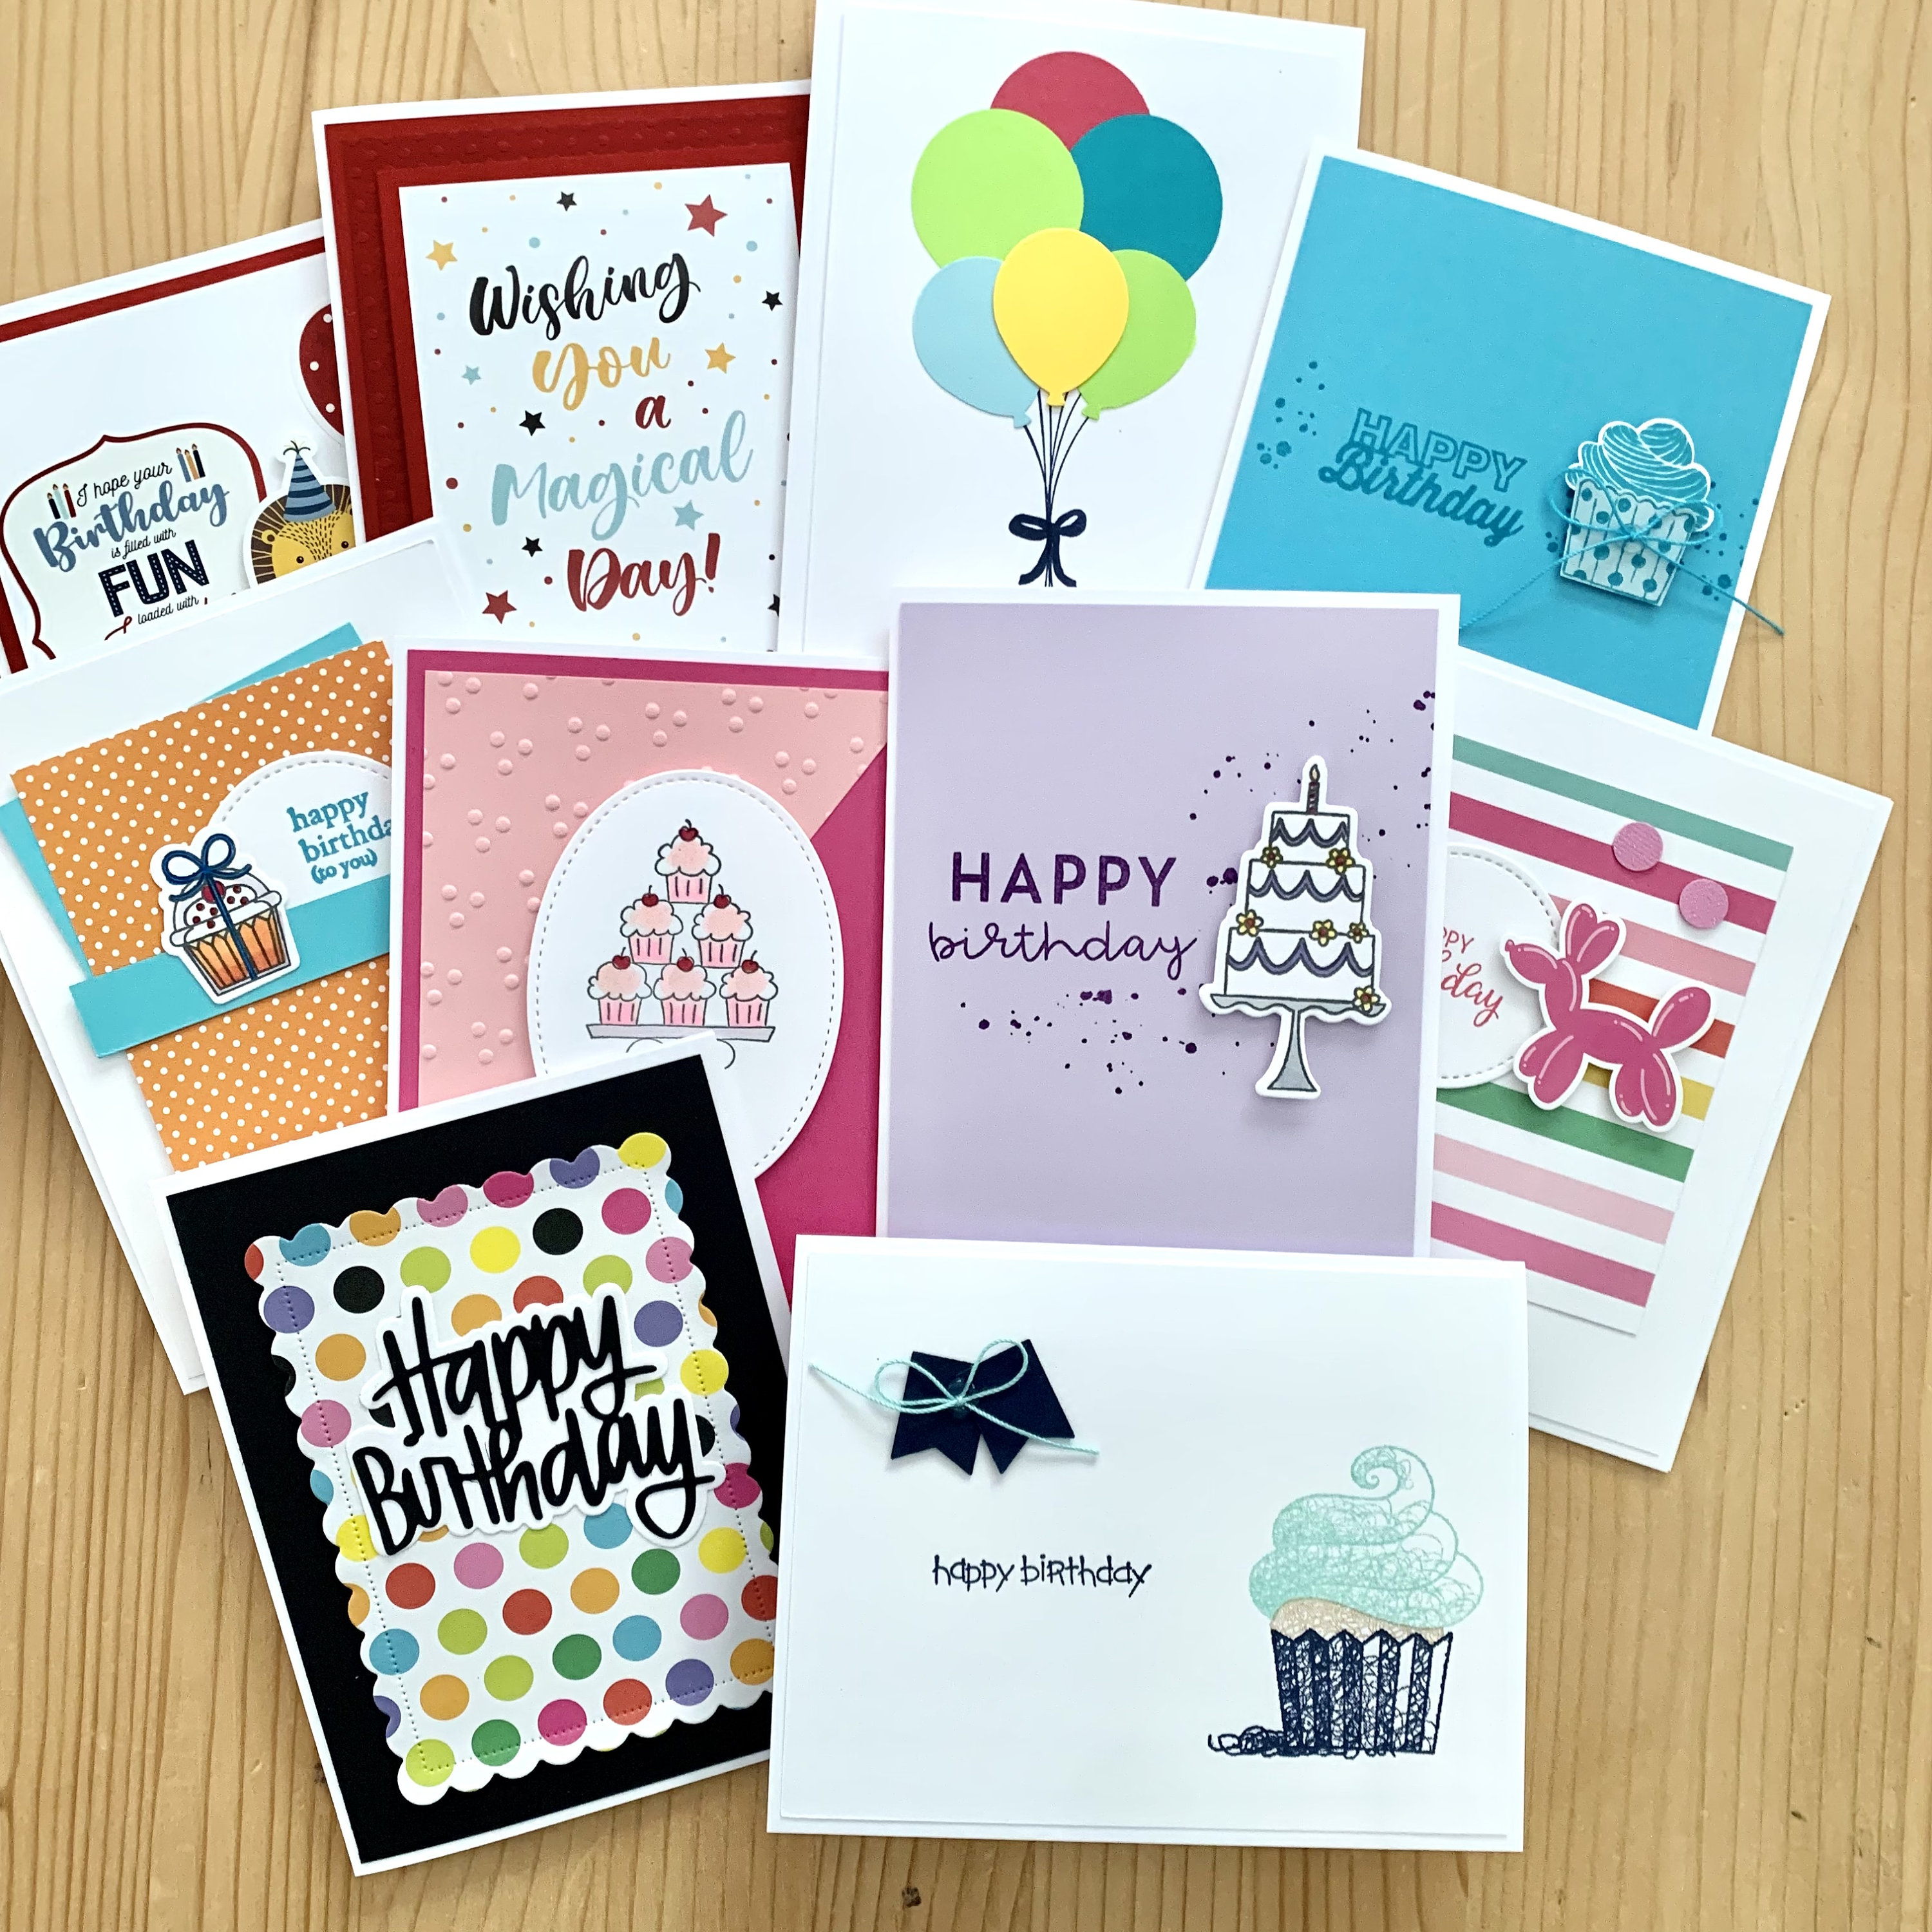 Paper Accents Super Value Cards and Envelopes